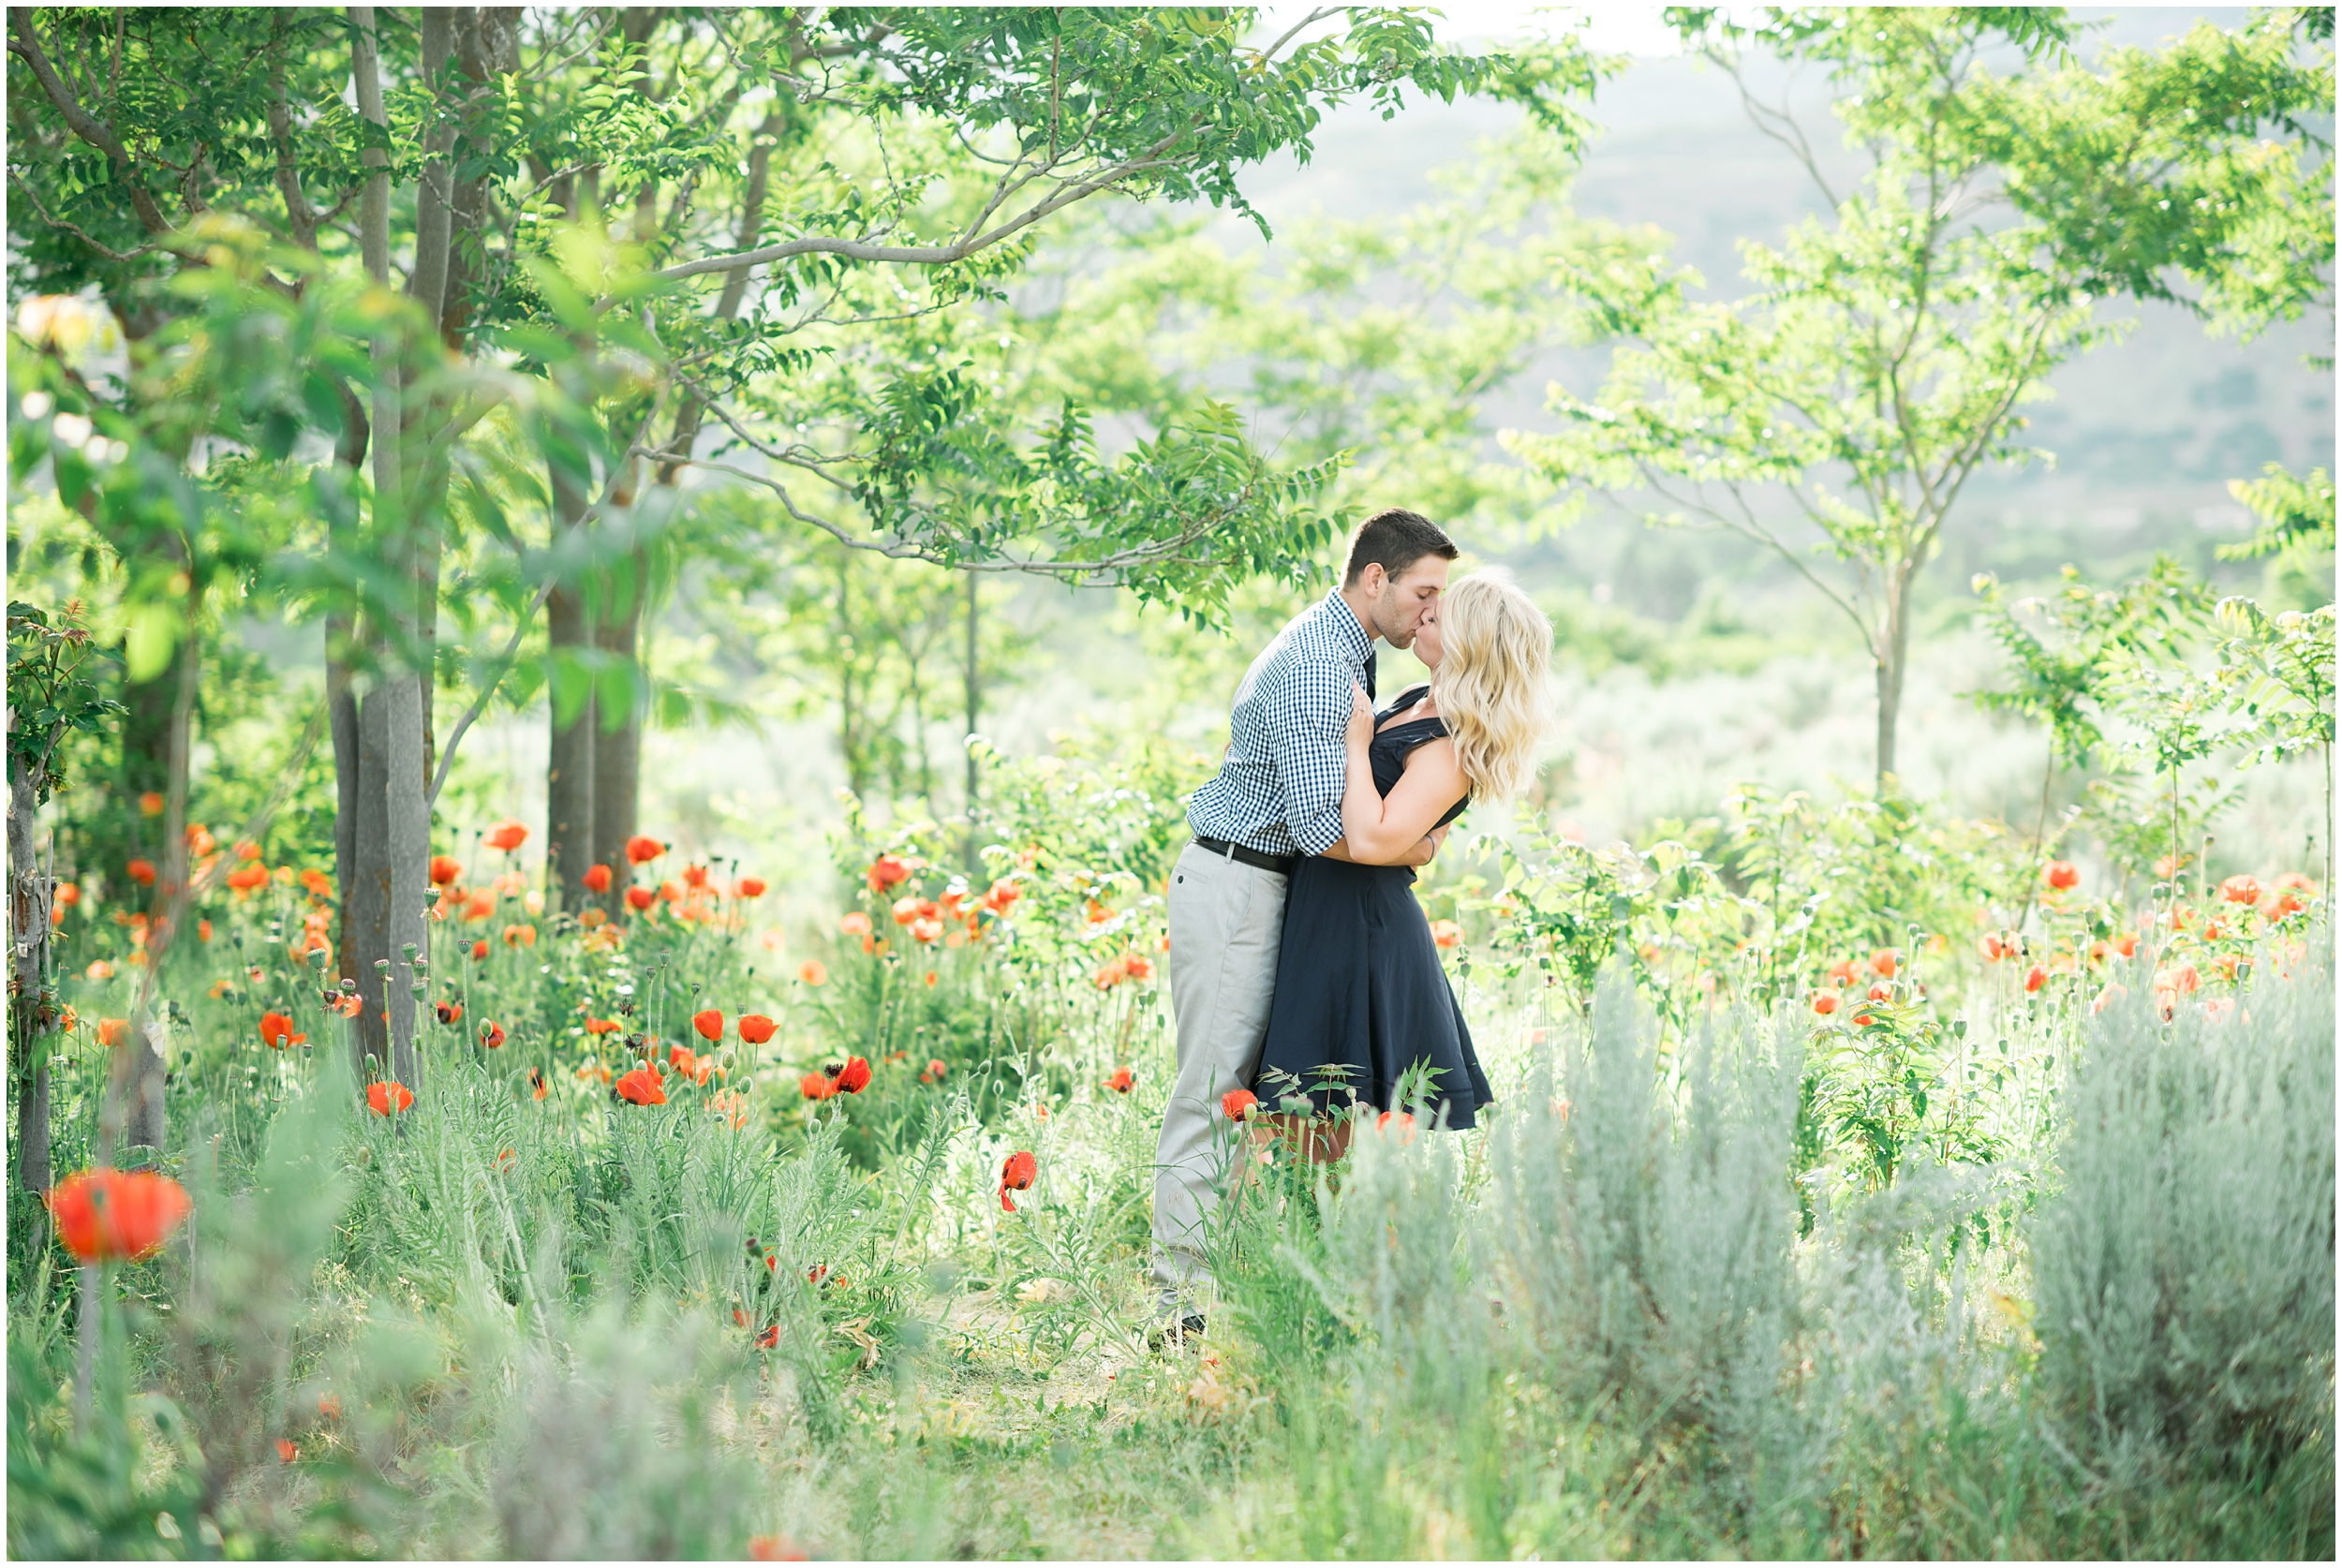 Poppies, fields engagements, black dress engagements, Utah mountains, mountain engagements, Utah wedding photographers, Utah wedding photographer, Utah wedding photography, Utah county wedding photography, Utah county wedding photographer, salt lake city photographers, salt lake city wedding photography, salt lake photographers, salt lake city photographers, photographers in Utah, Utah photography, photography Utah, photographer Utah, Kristina Curtis photography, Kristina Curtis Photographer, www.kristinacurtisphotography.com